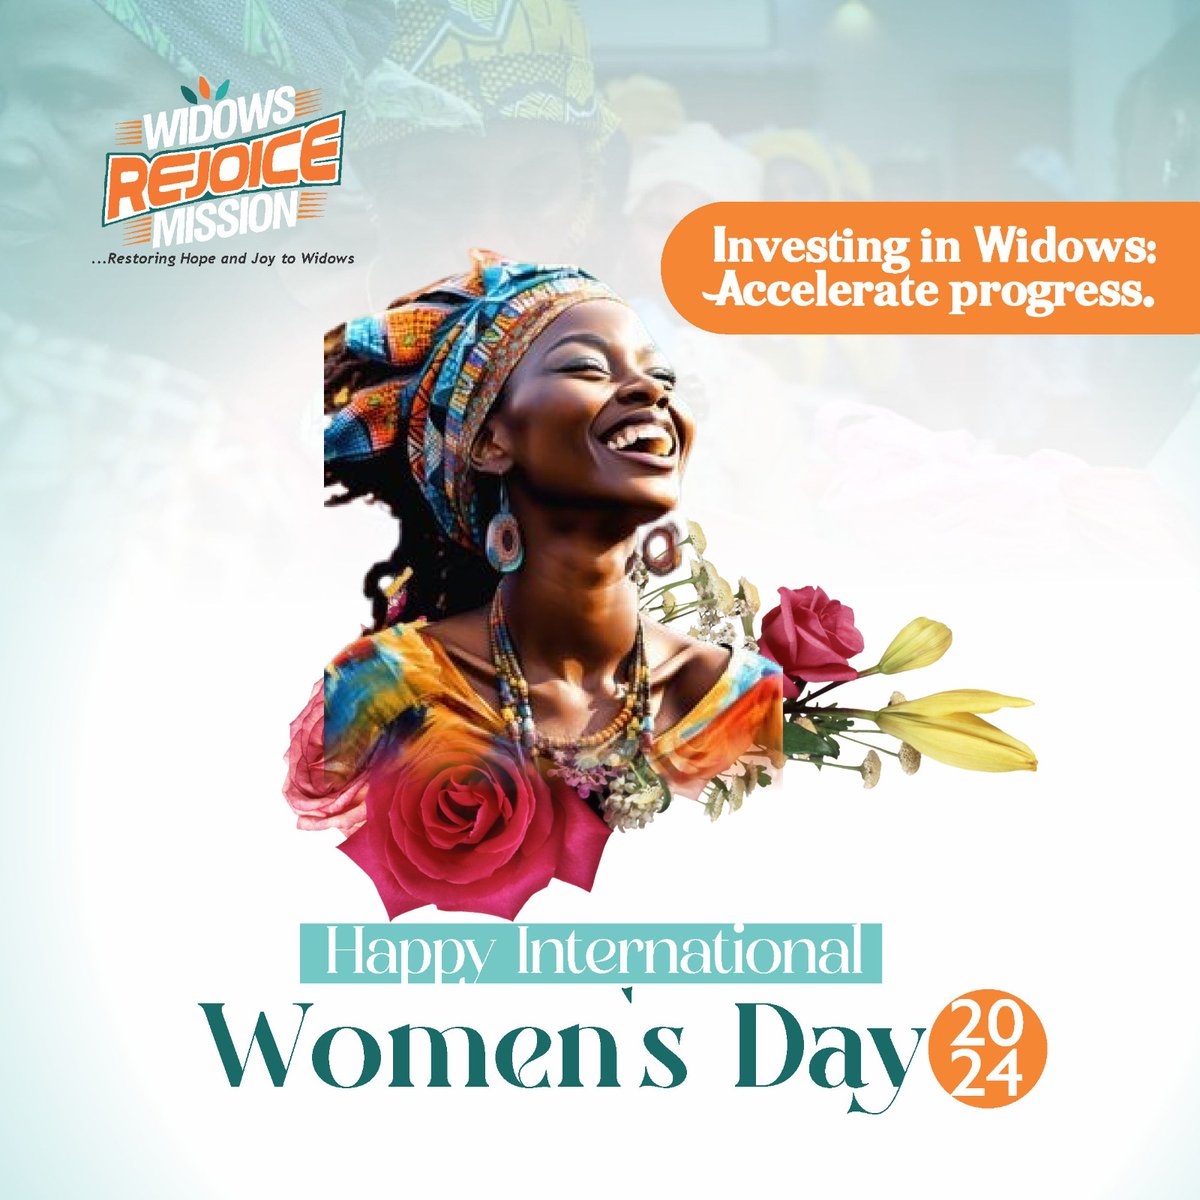 As we celebrate the women in our lives, let's dare to dream of a world where every widow's voice is heard very loud 🔊🔊🔊 and valued. Many rural widows and orphans are living below the poverty line, lacking access to basic education, good accommodations, nutrition, and adequate